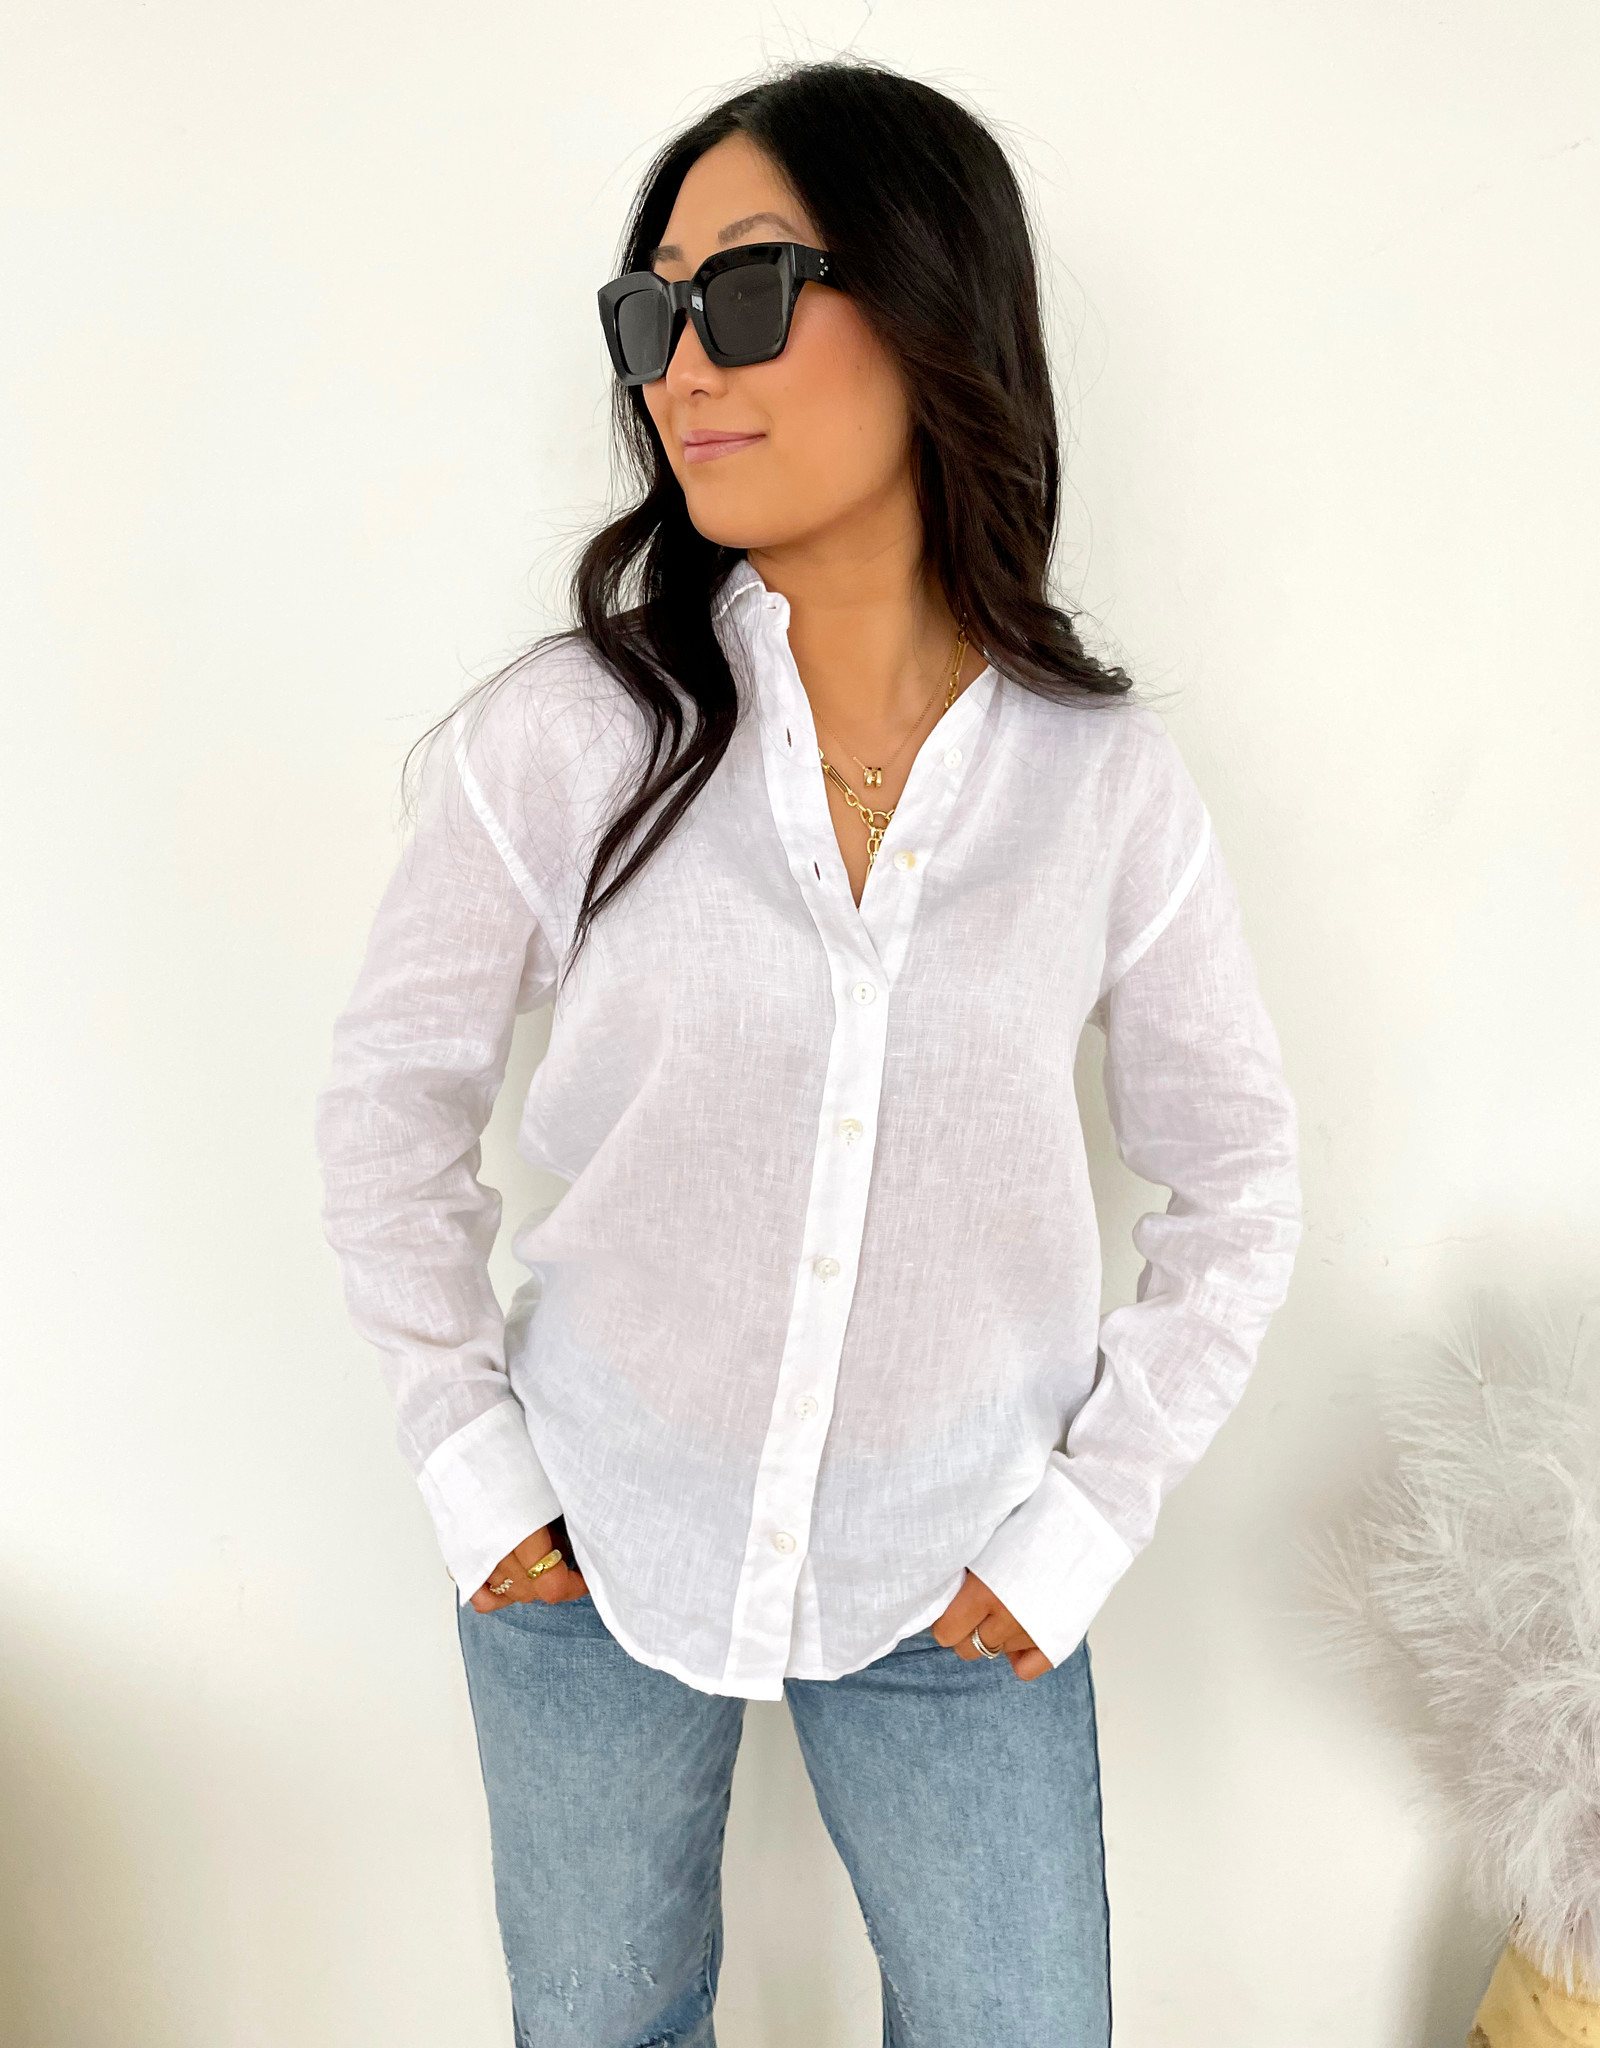 Marykate Linen Button Down Oxford Top